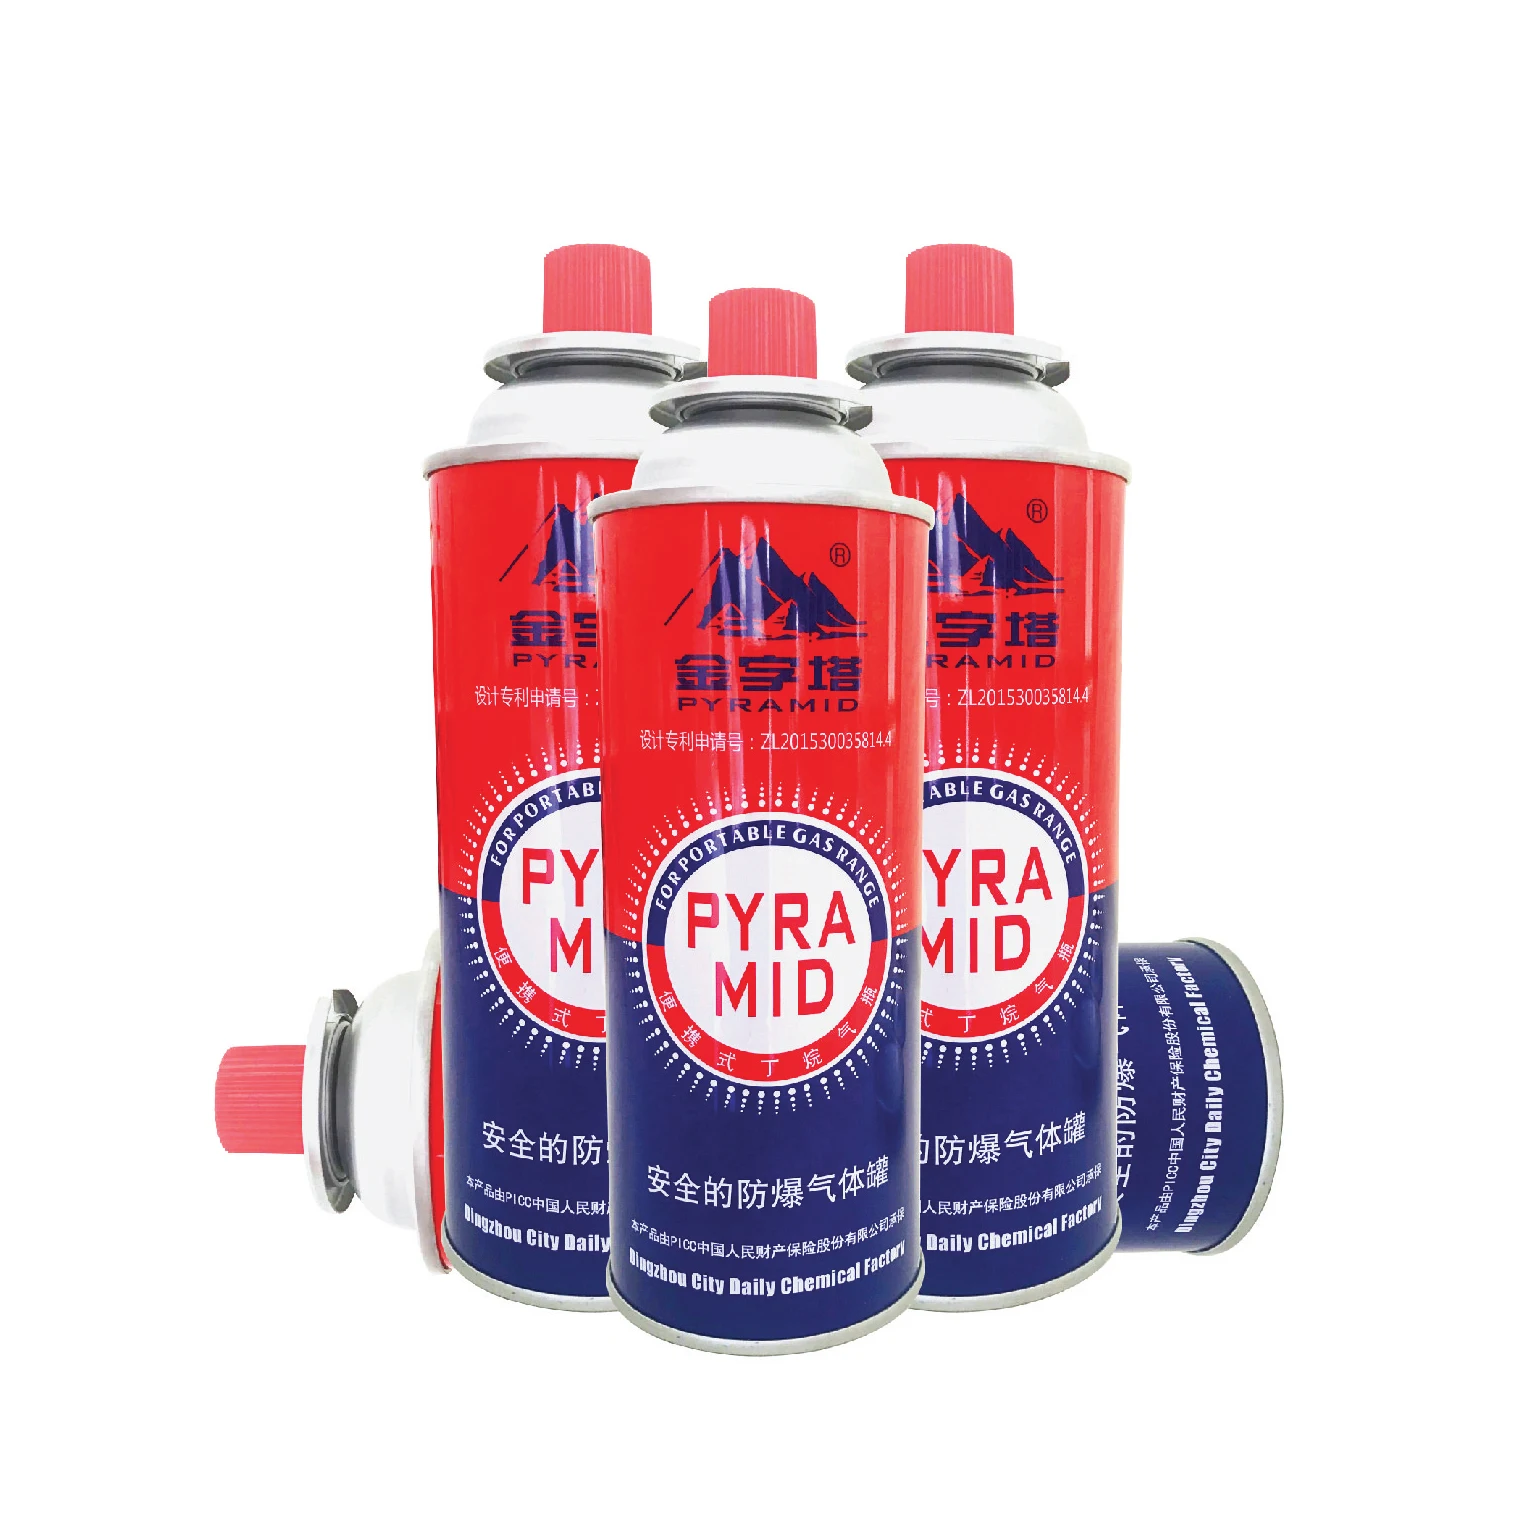 

Portable Cassette gas cylinders refill tin empty 220g refillable aerosol camping butane gas canister cartridge cans